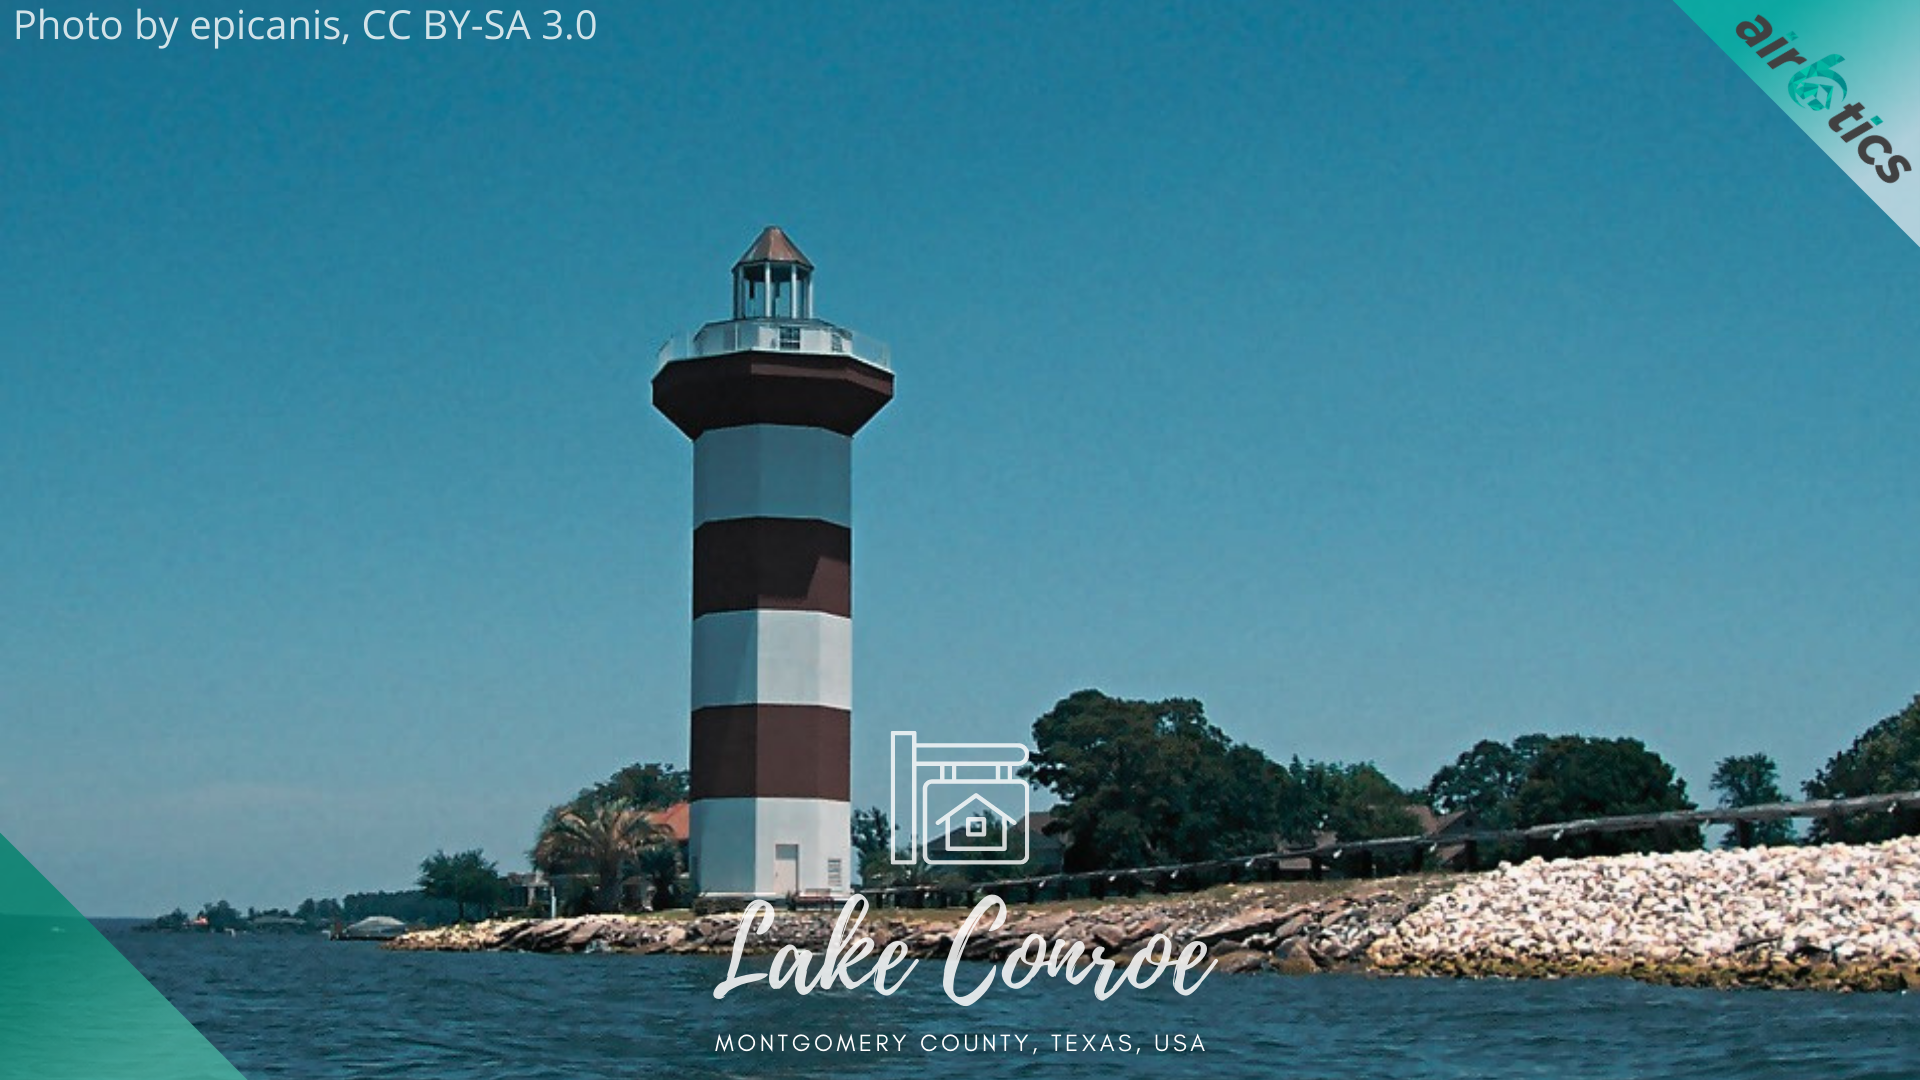 Airbnb investment analysis lake conroe